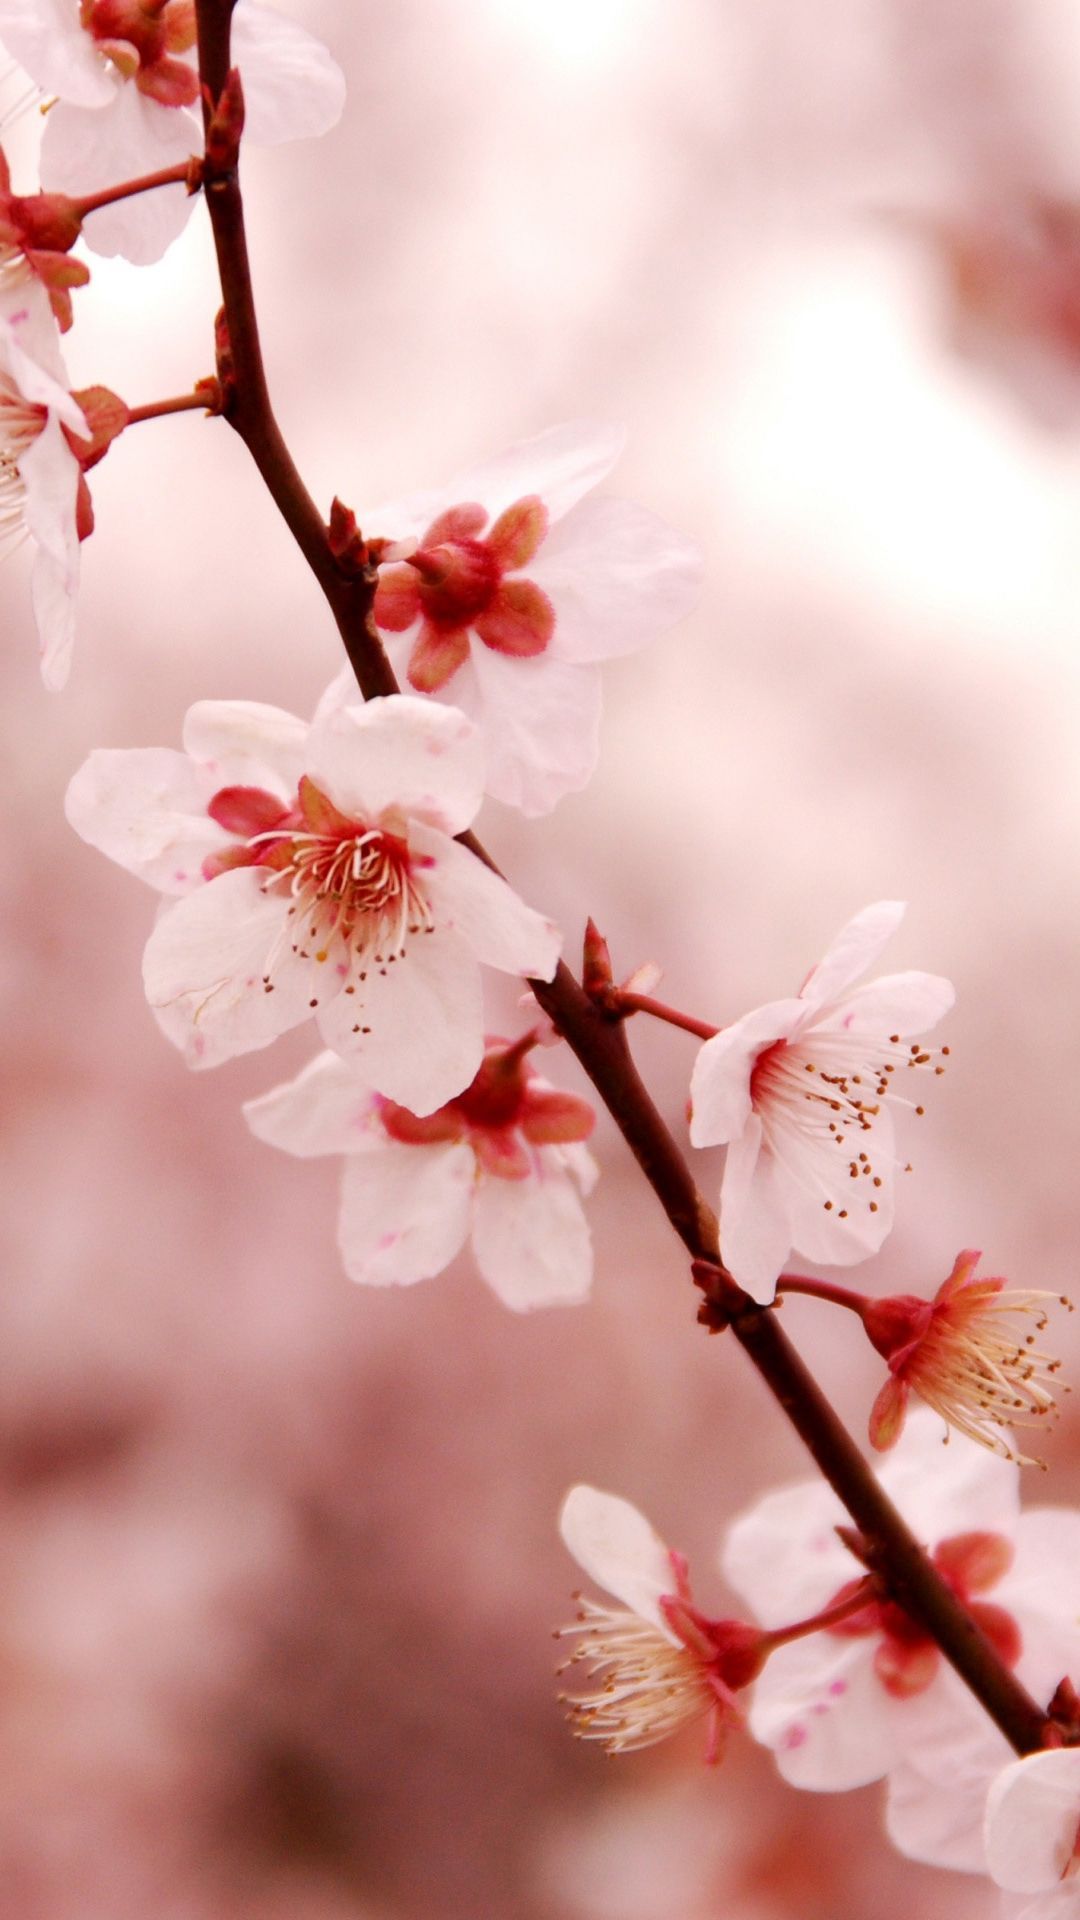 Cherry Blossom iPhone Wallpaper Download Free. Cherry blossom wallpaper, Cherry blossom background, New nature wallpaper